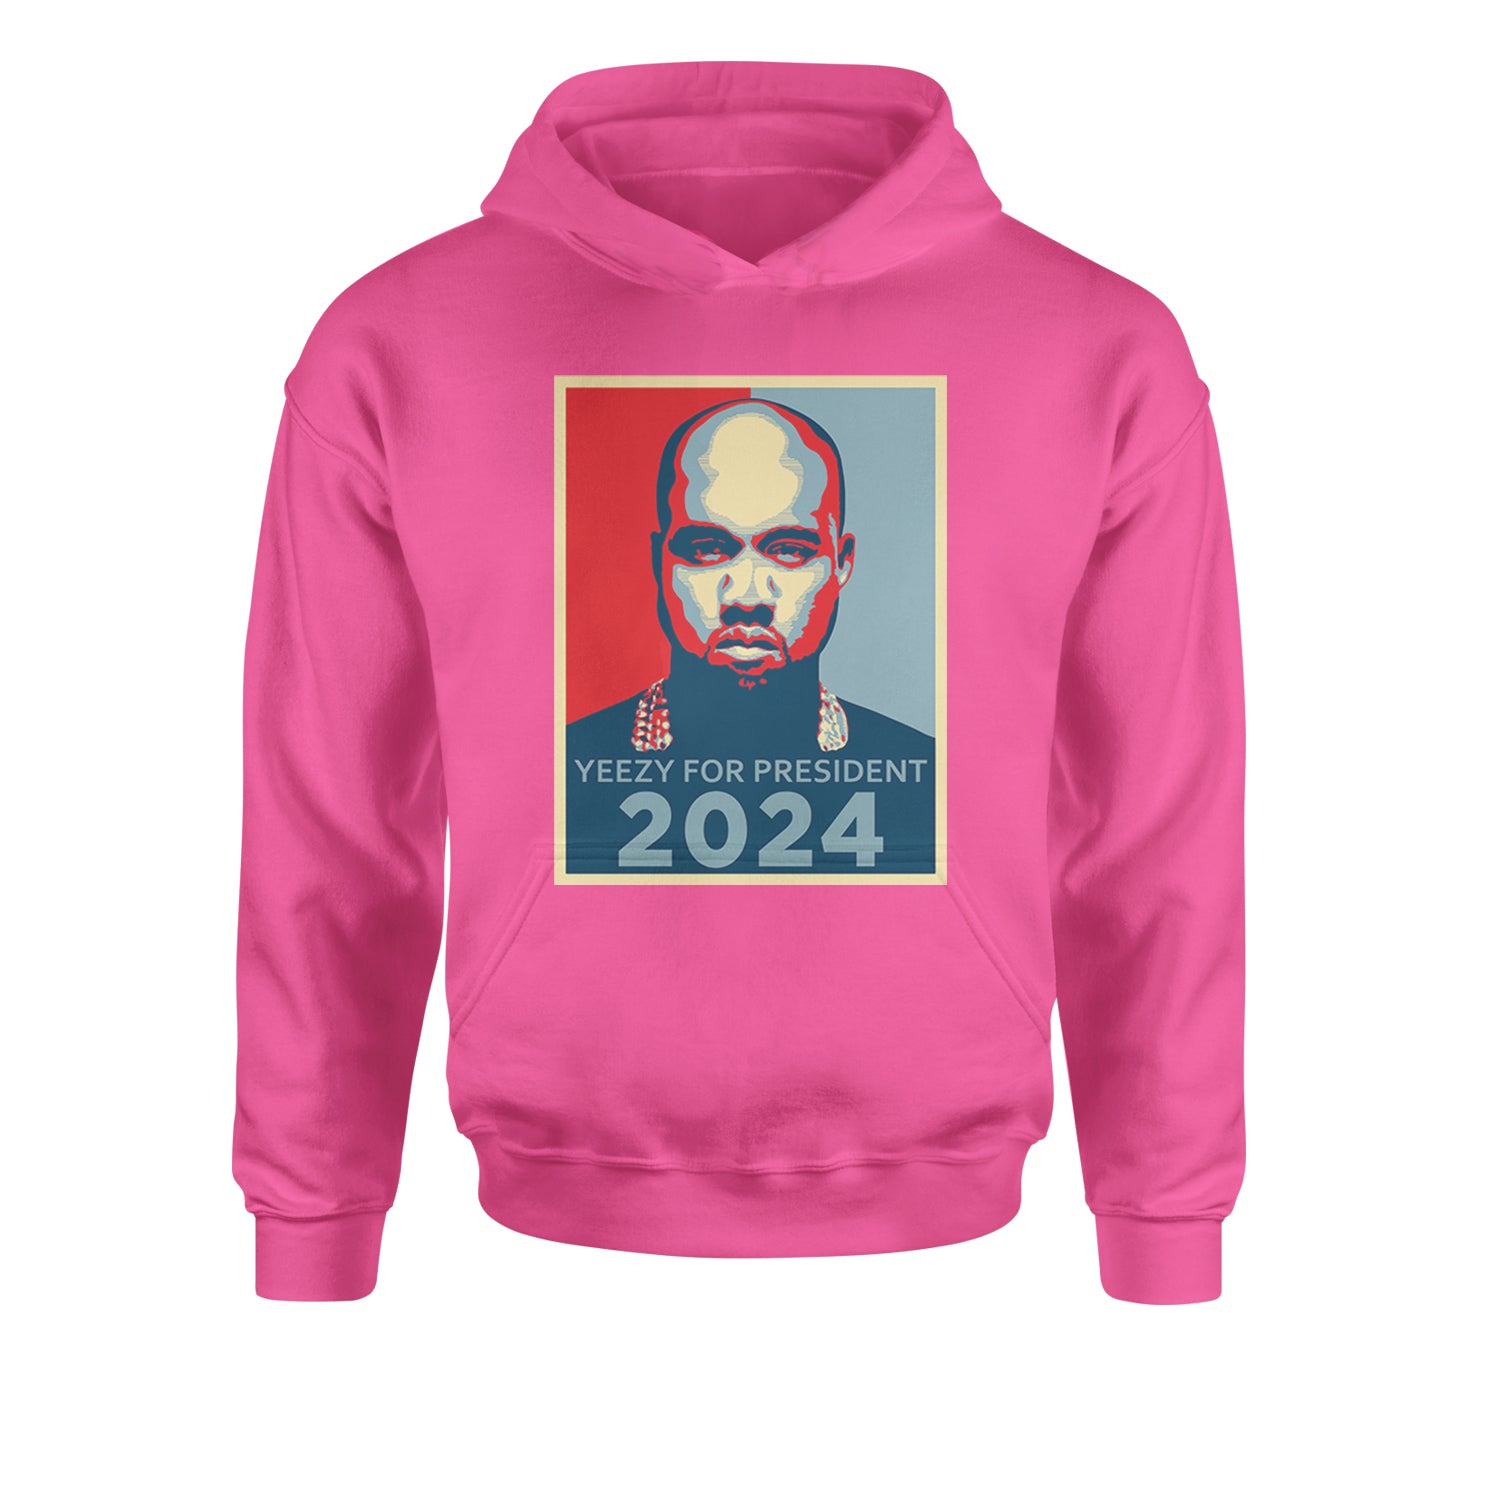 Yeezus For President Vote for Ye Youth-Sized Hoodie Hot Pink